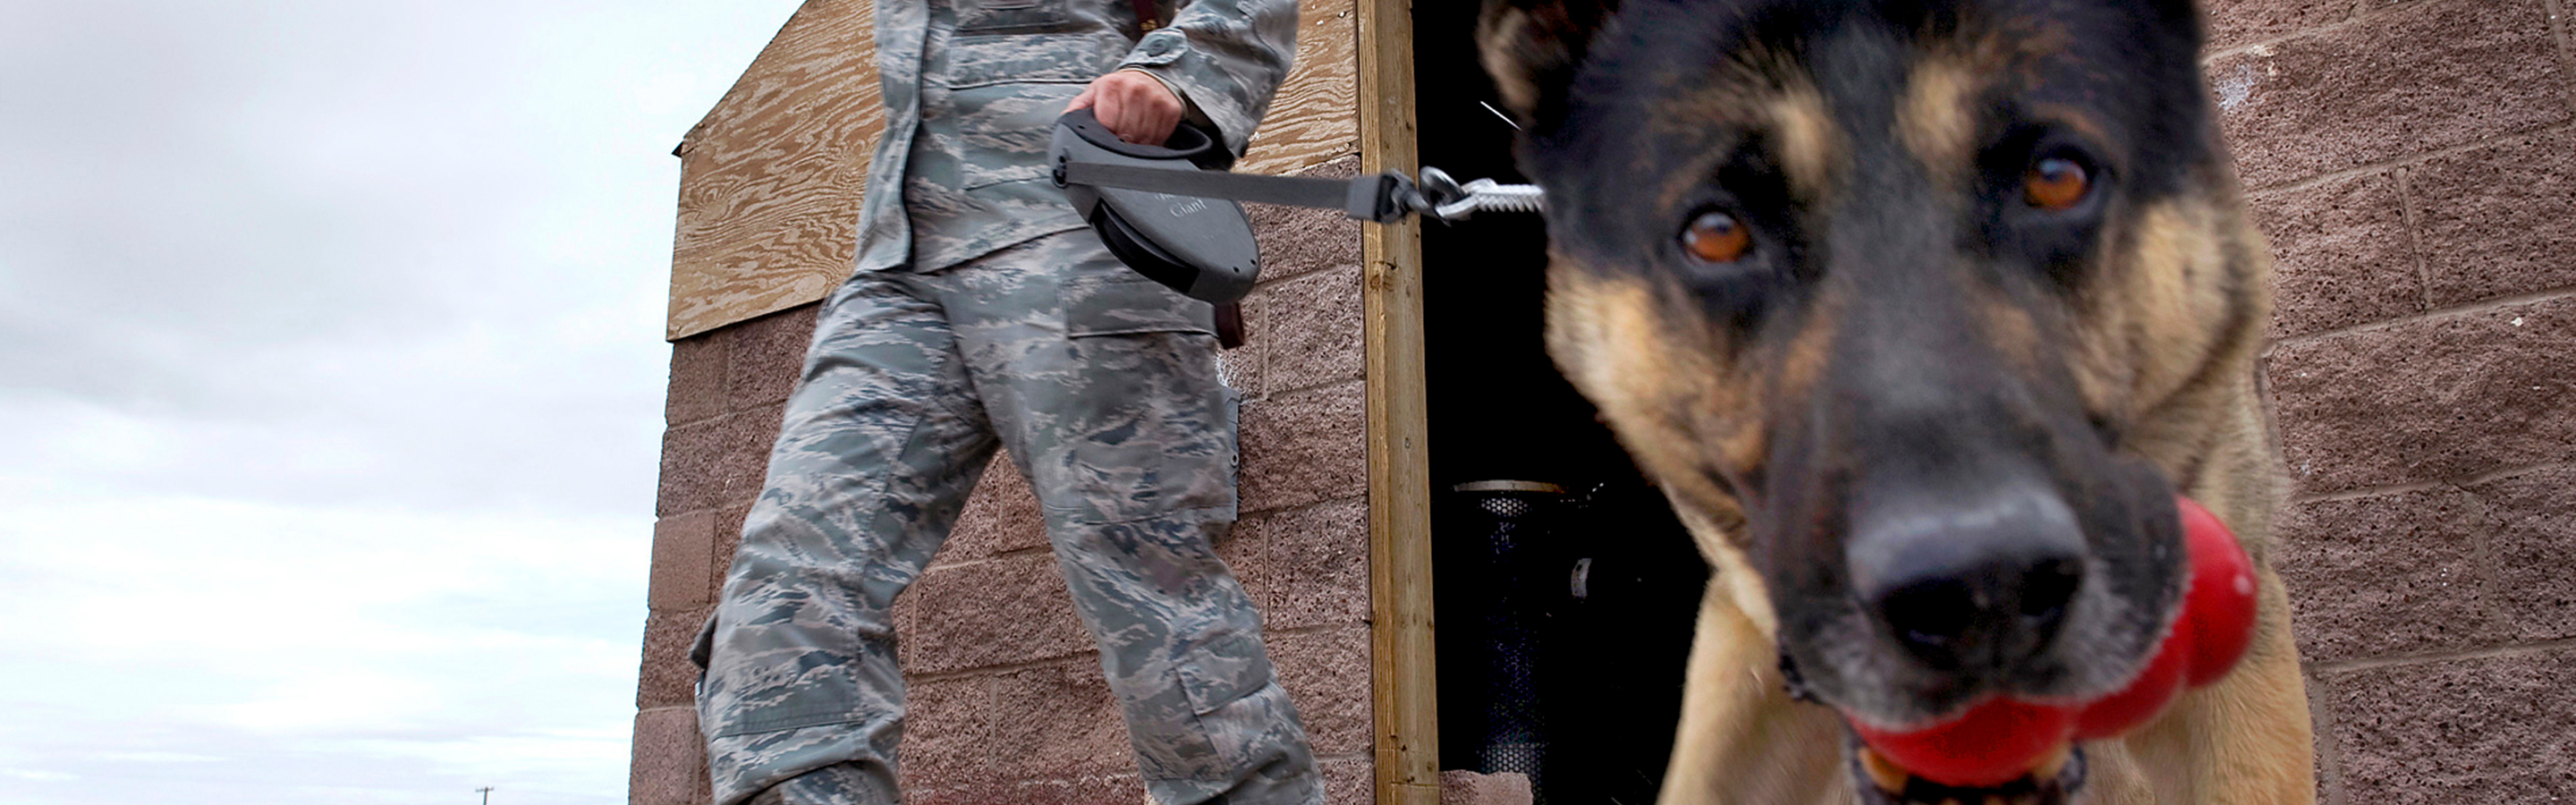 Military working dog with soldier in background